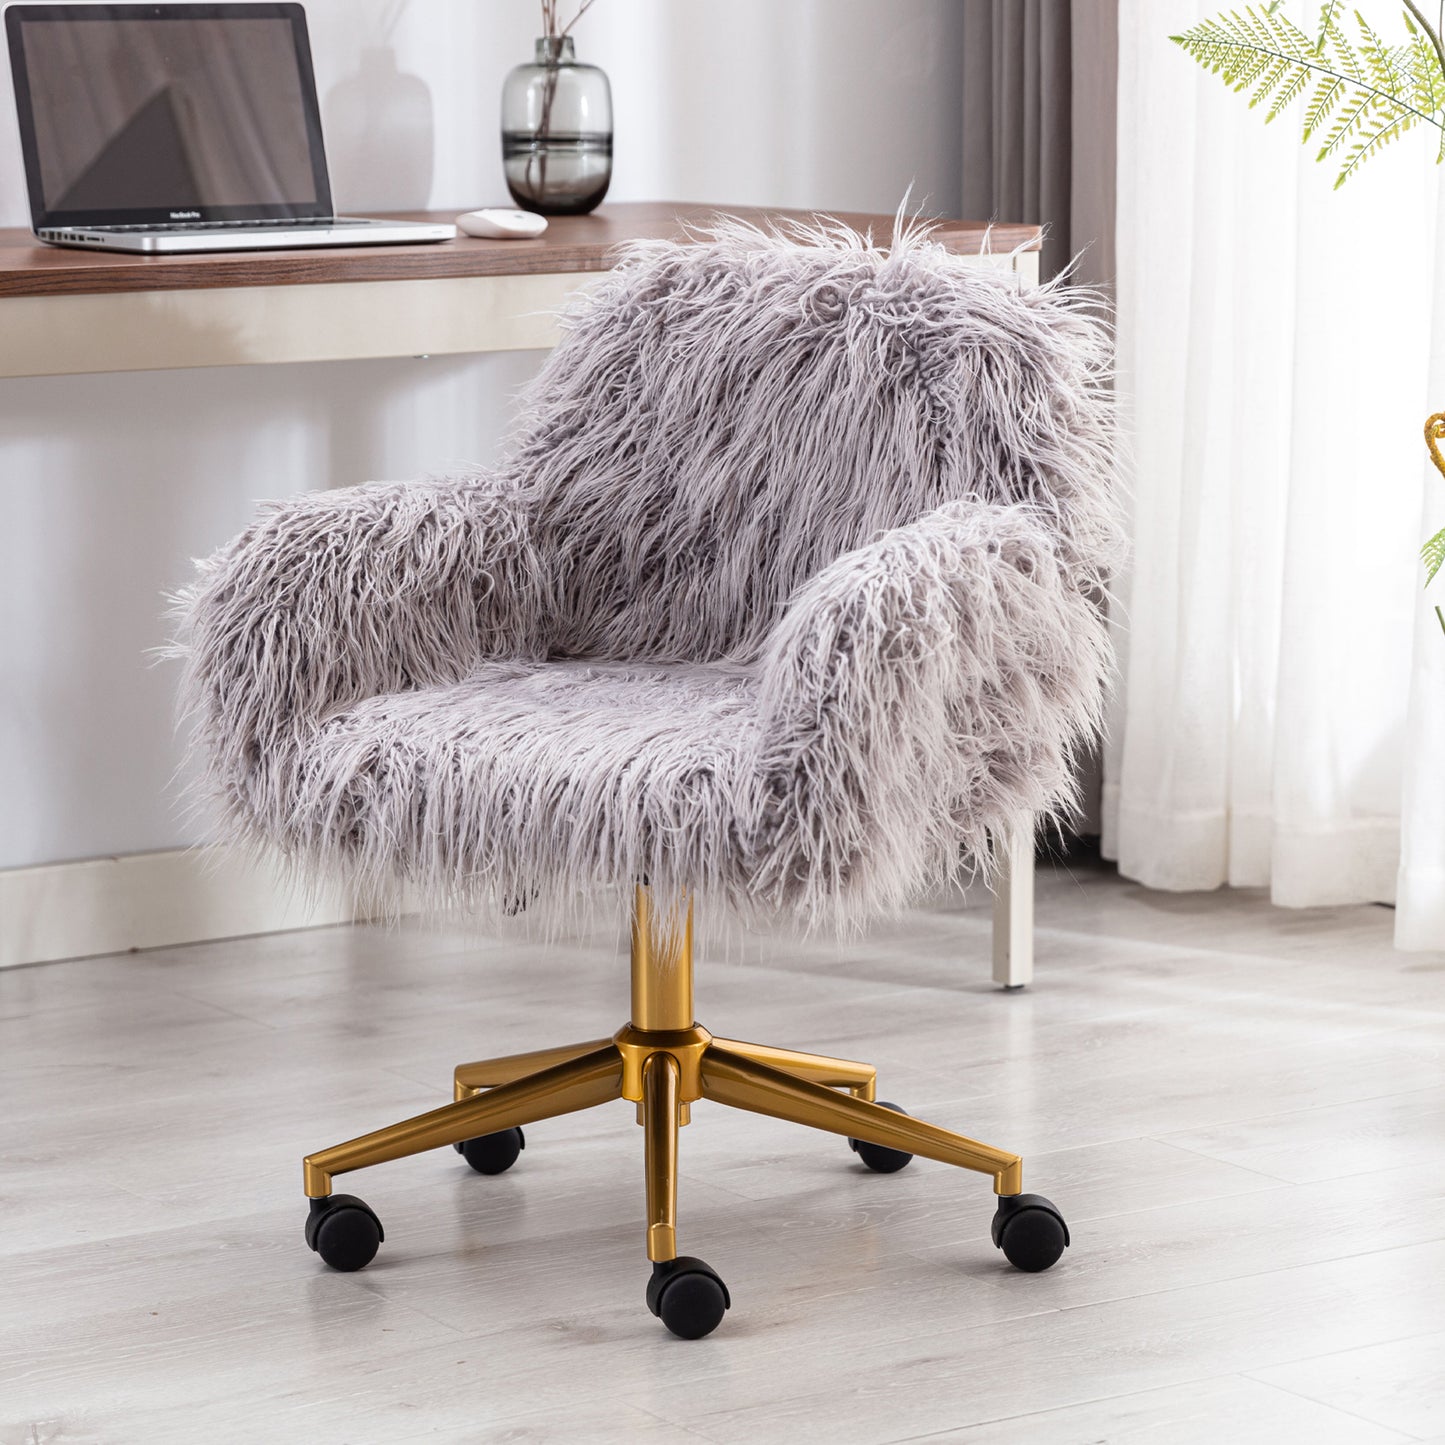 Faux Fur Desk Chair, Cute Fluffy Upholstered Padded Seat, Vanity Accent Modern Height Adjustable Swivel Arm Decorative Furniture for Living Room, Makeup, Home Office, Teen Girls Bedroom, White